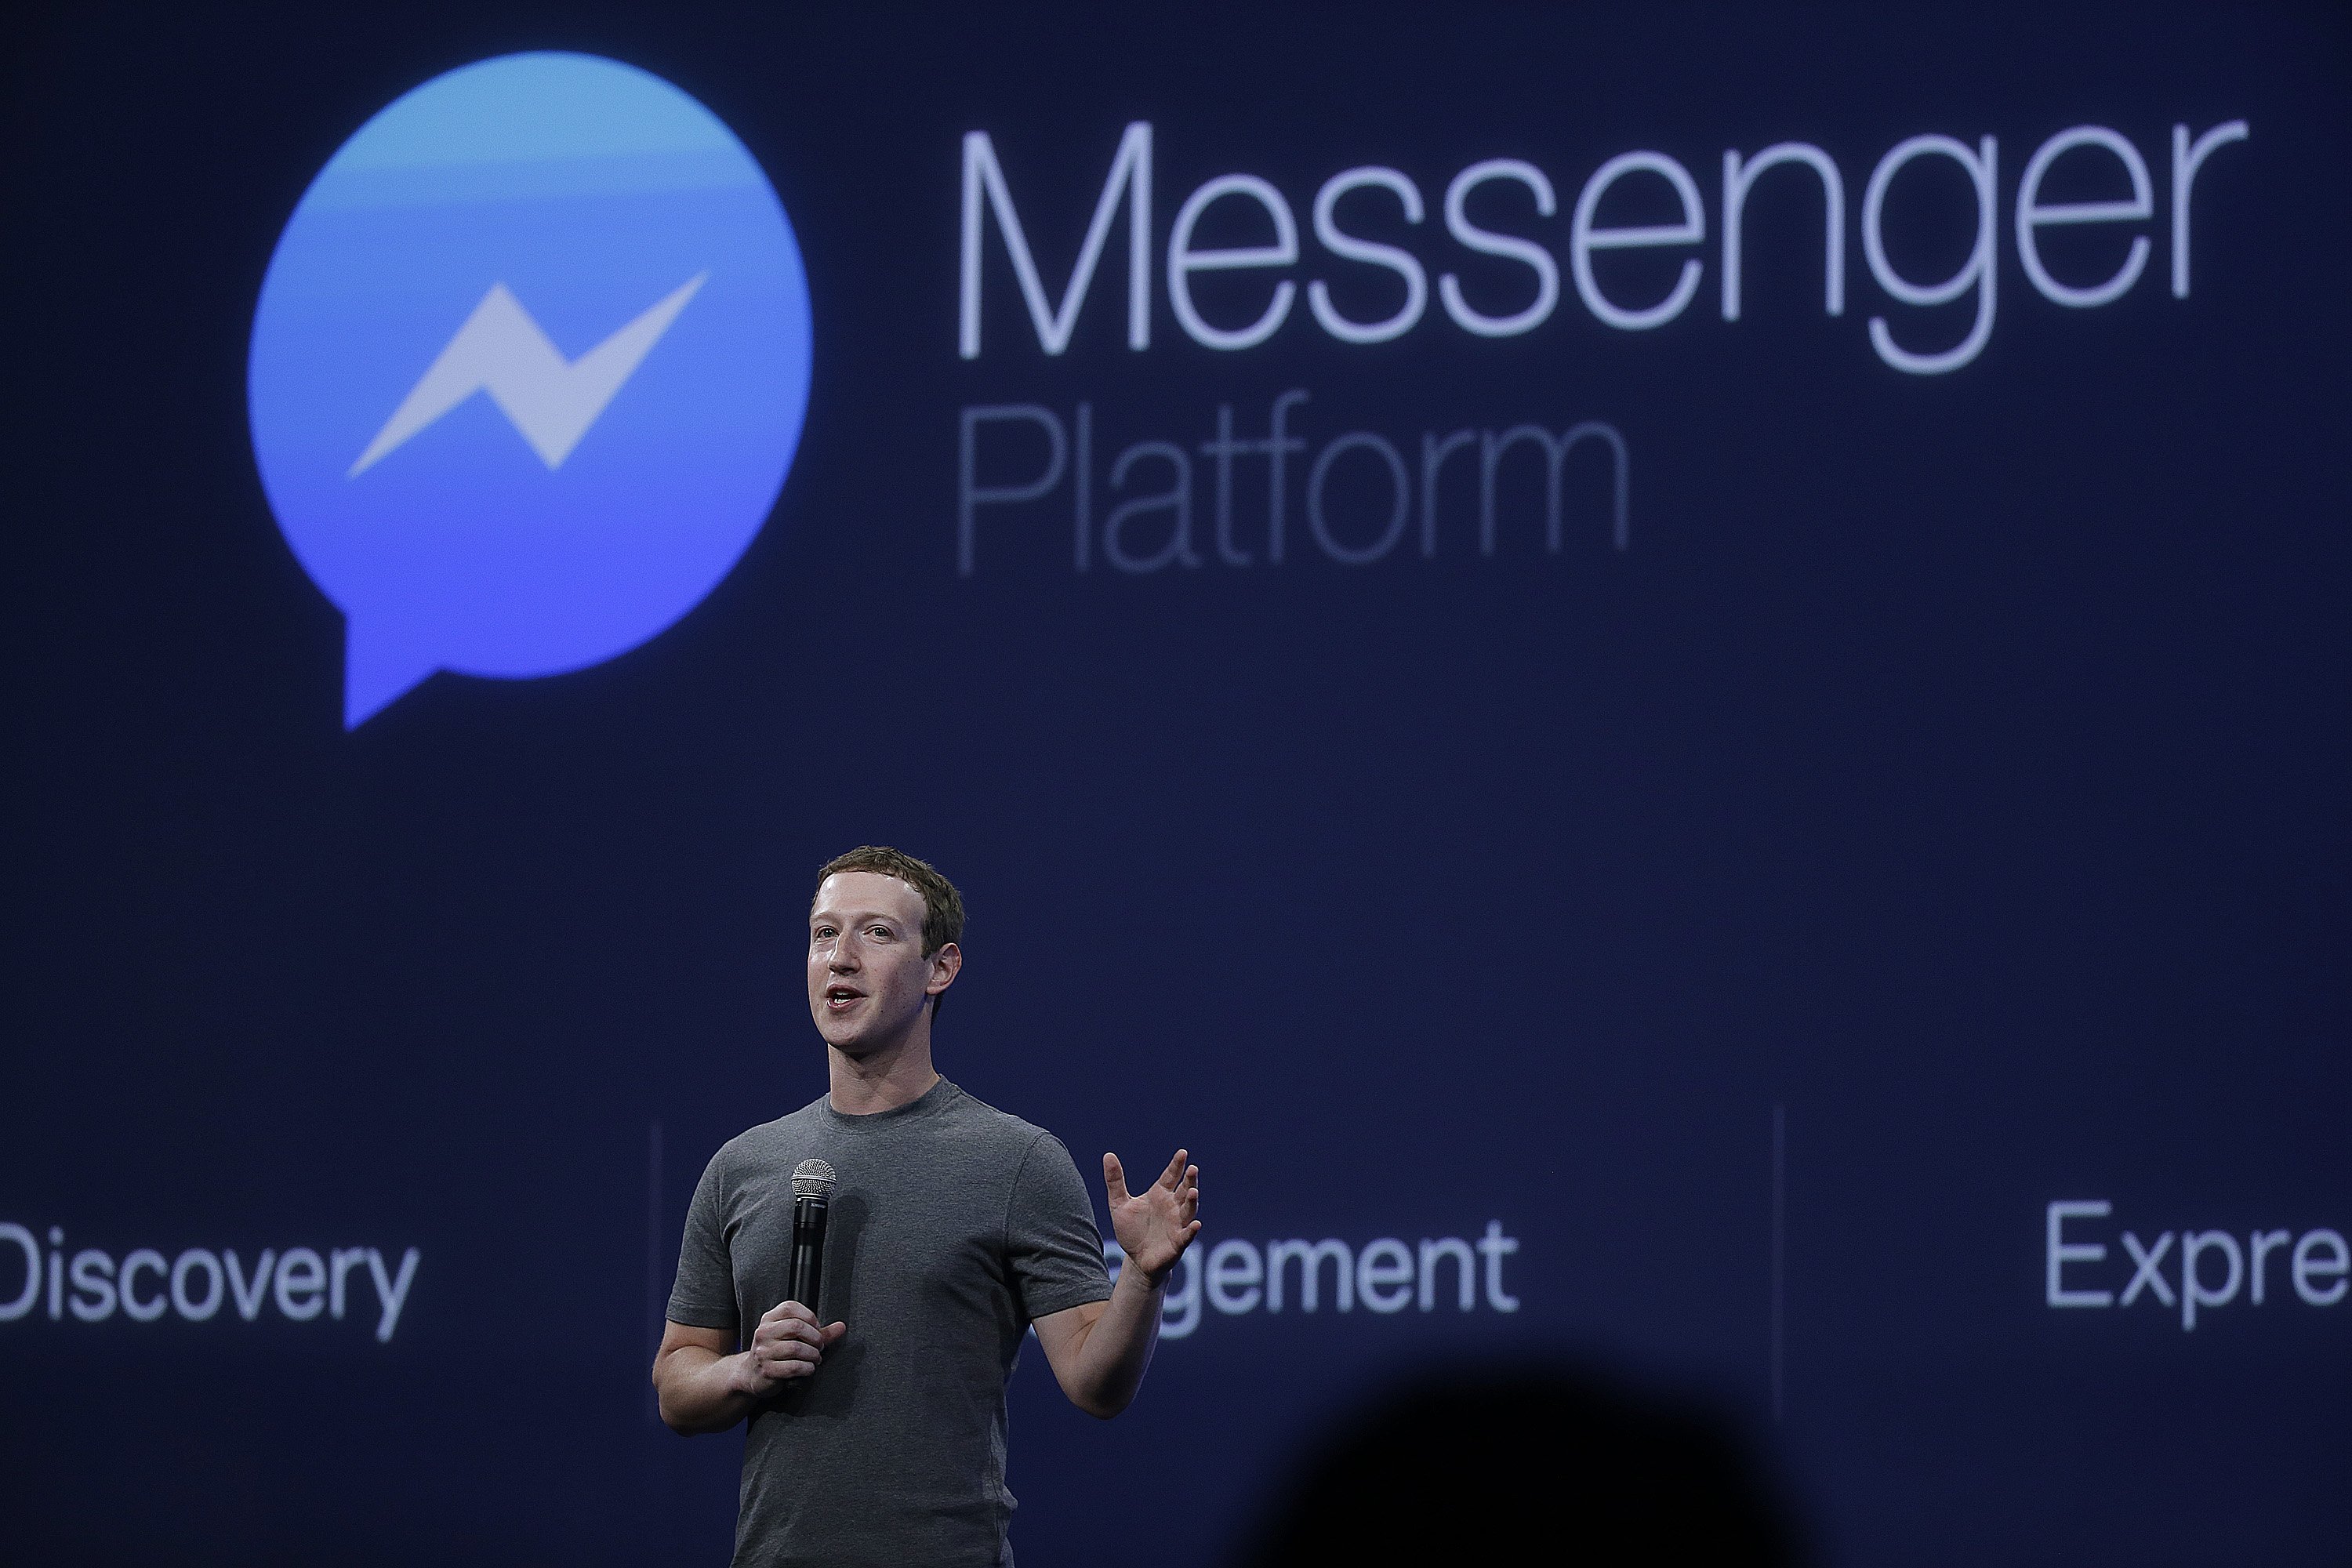 Facebook Chairman Mark Zuckerberg discussed the Messenger app at a conference in San Francisco in March. Photo: AP